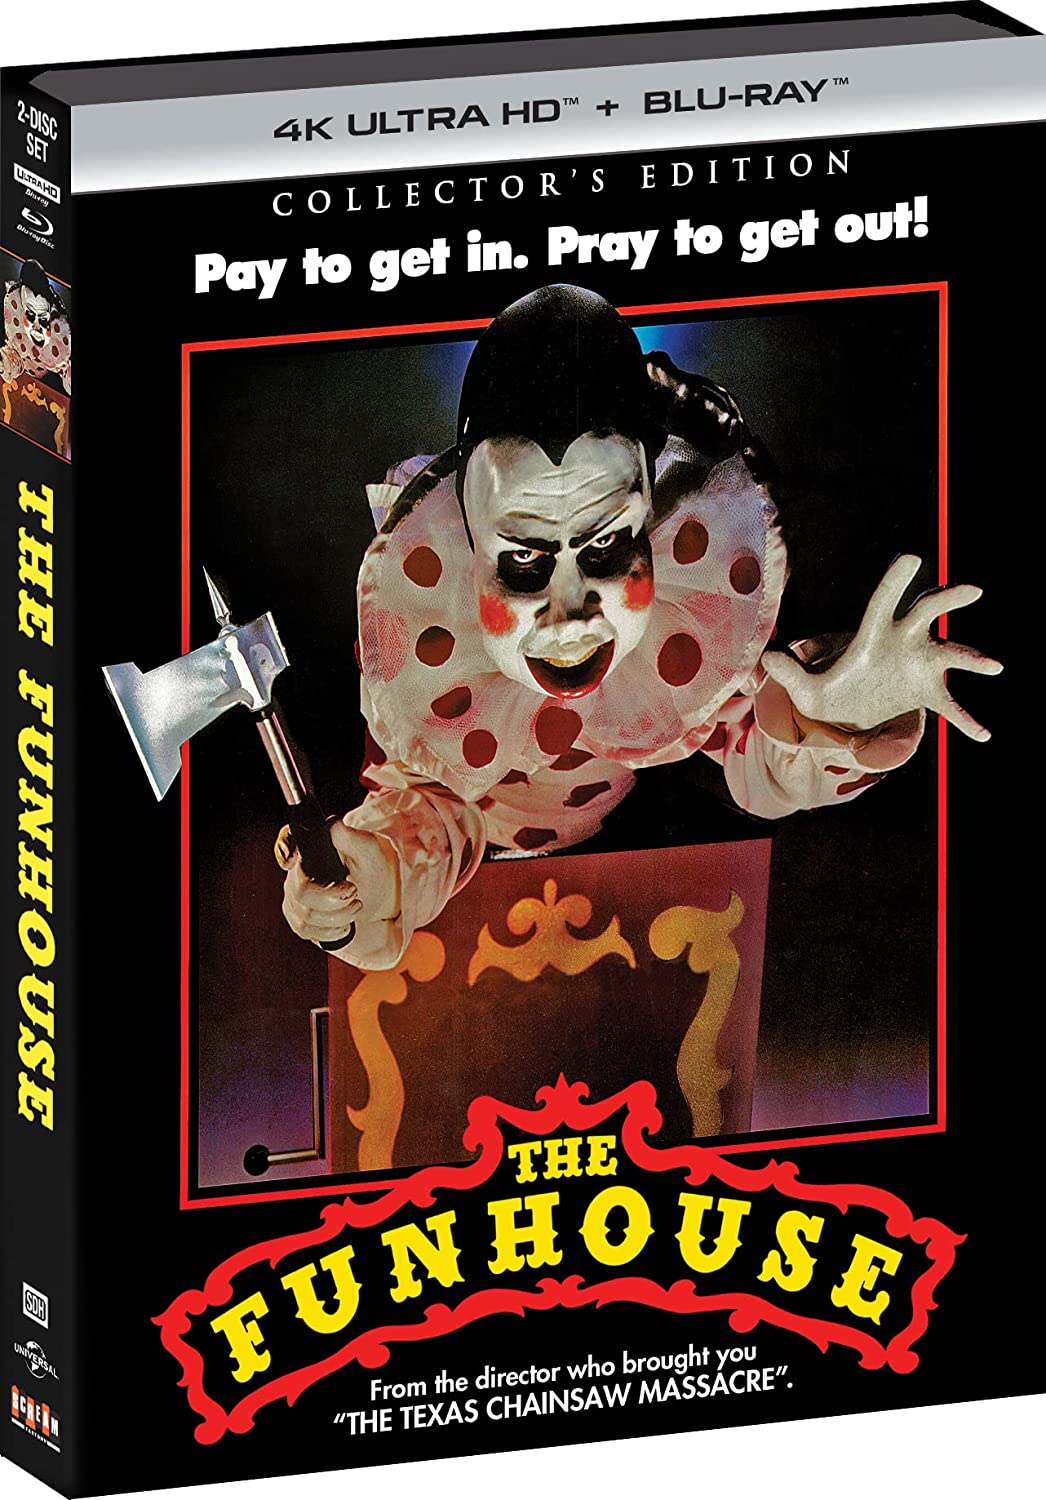 Daily Grindhouse  40 Years Of THE WATCHER IN THE WOODS, Disney's Cosmic  Horror